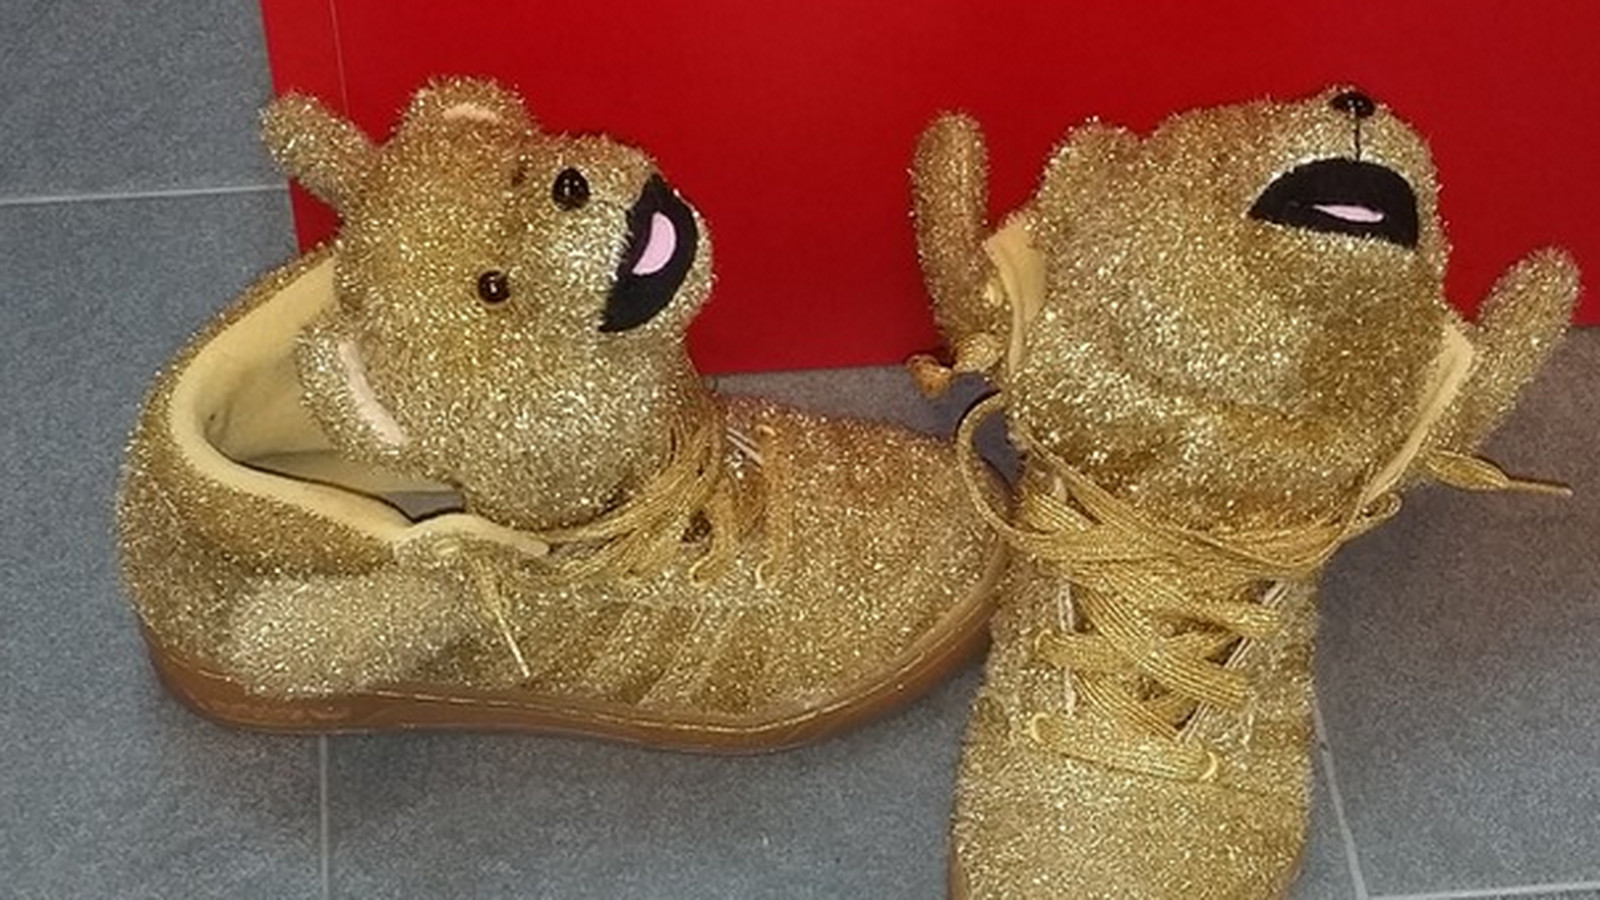 Dani Alves' sparkly teddy bear shoes are a work of art